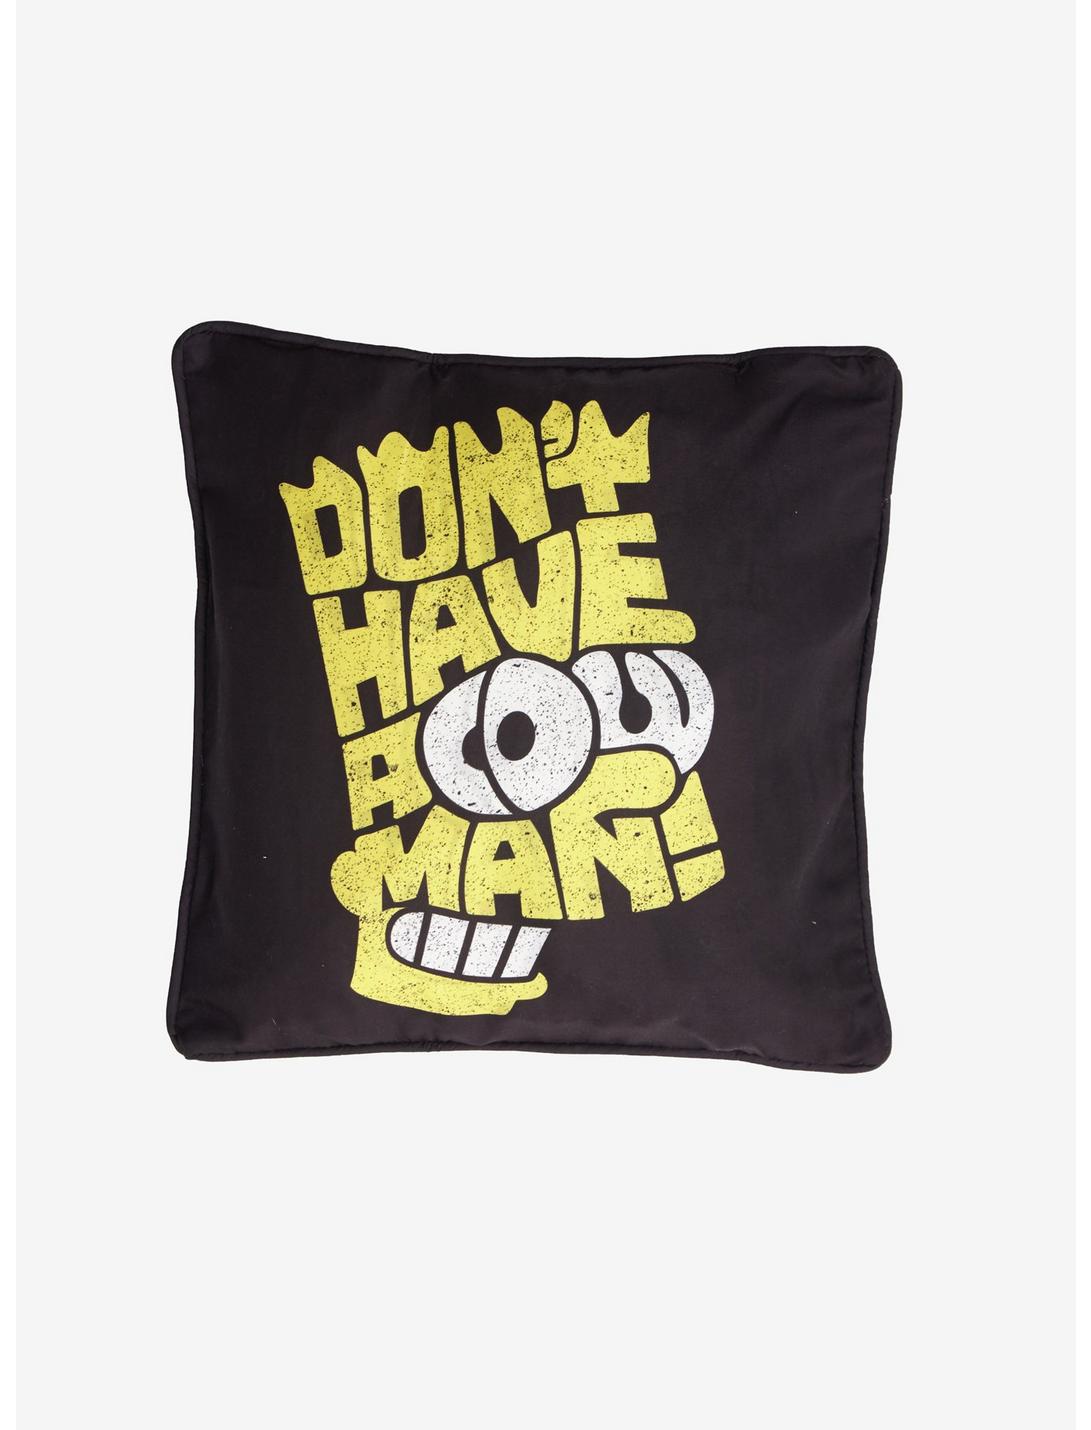 The Simpsons Bart Don't Have A Cow Pillow Cover, , hi-res